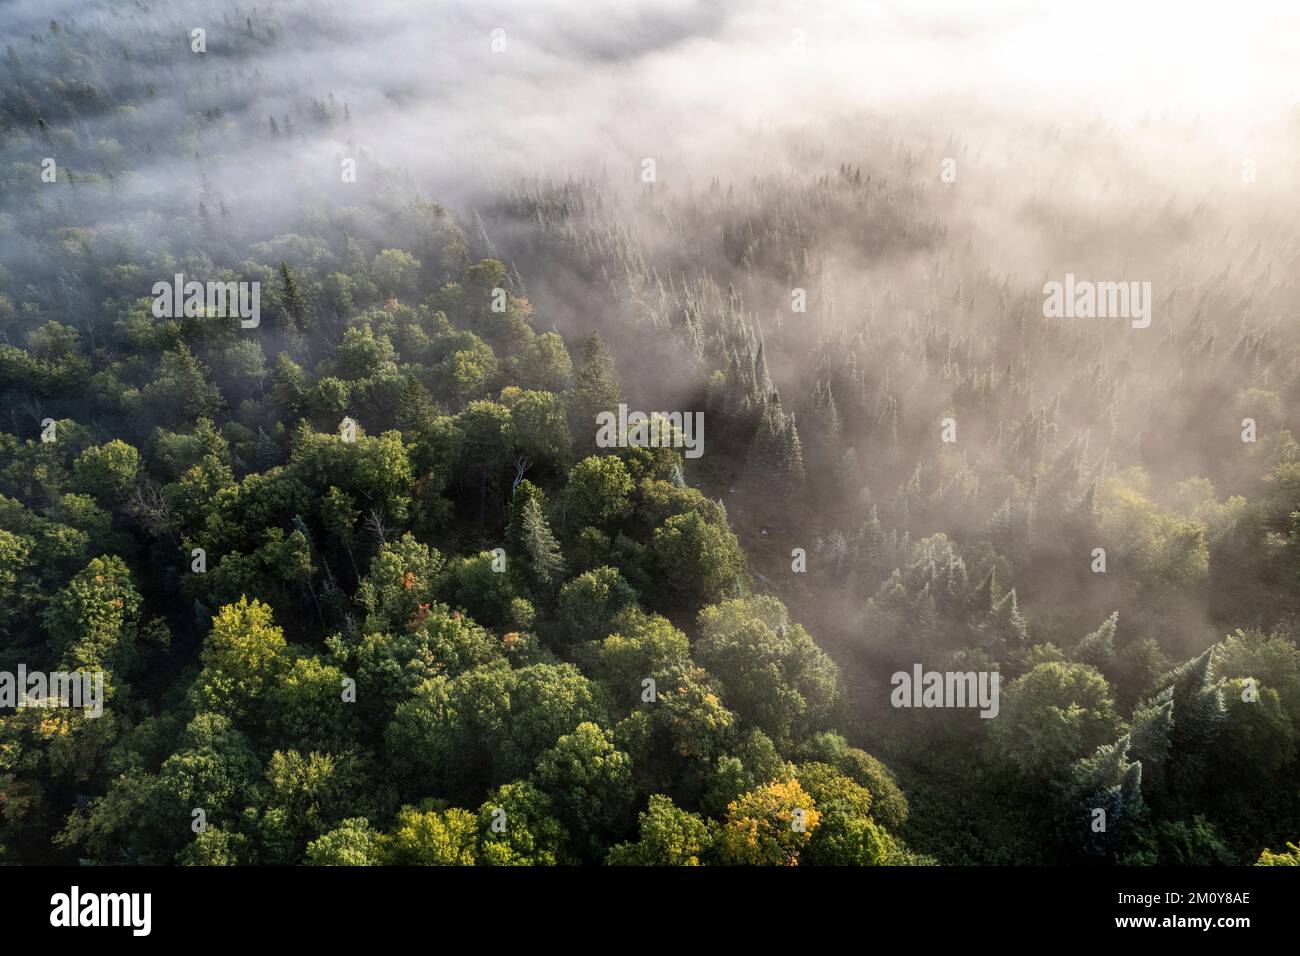 Aerial image of US - Canada border bathed in mist and fog Stock Photo